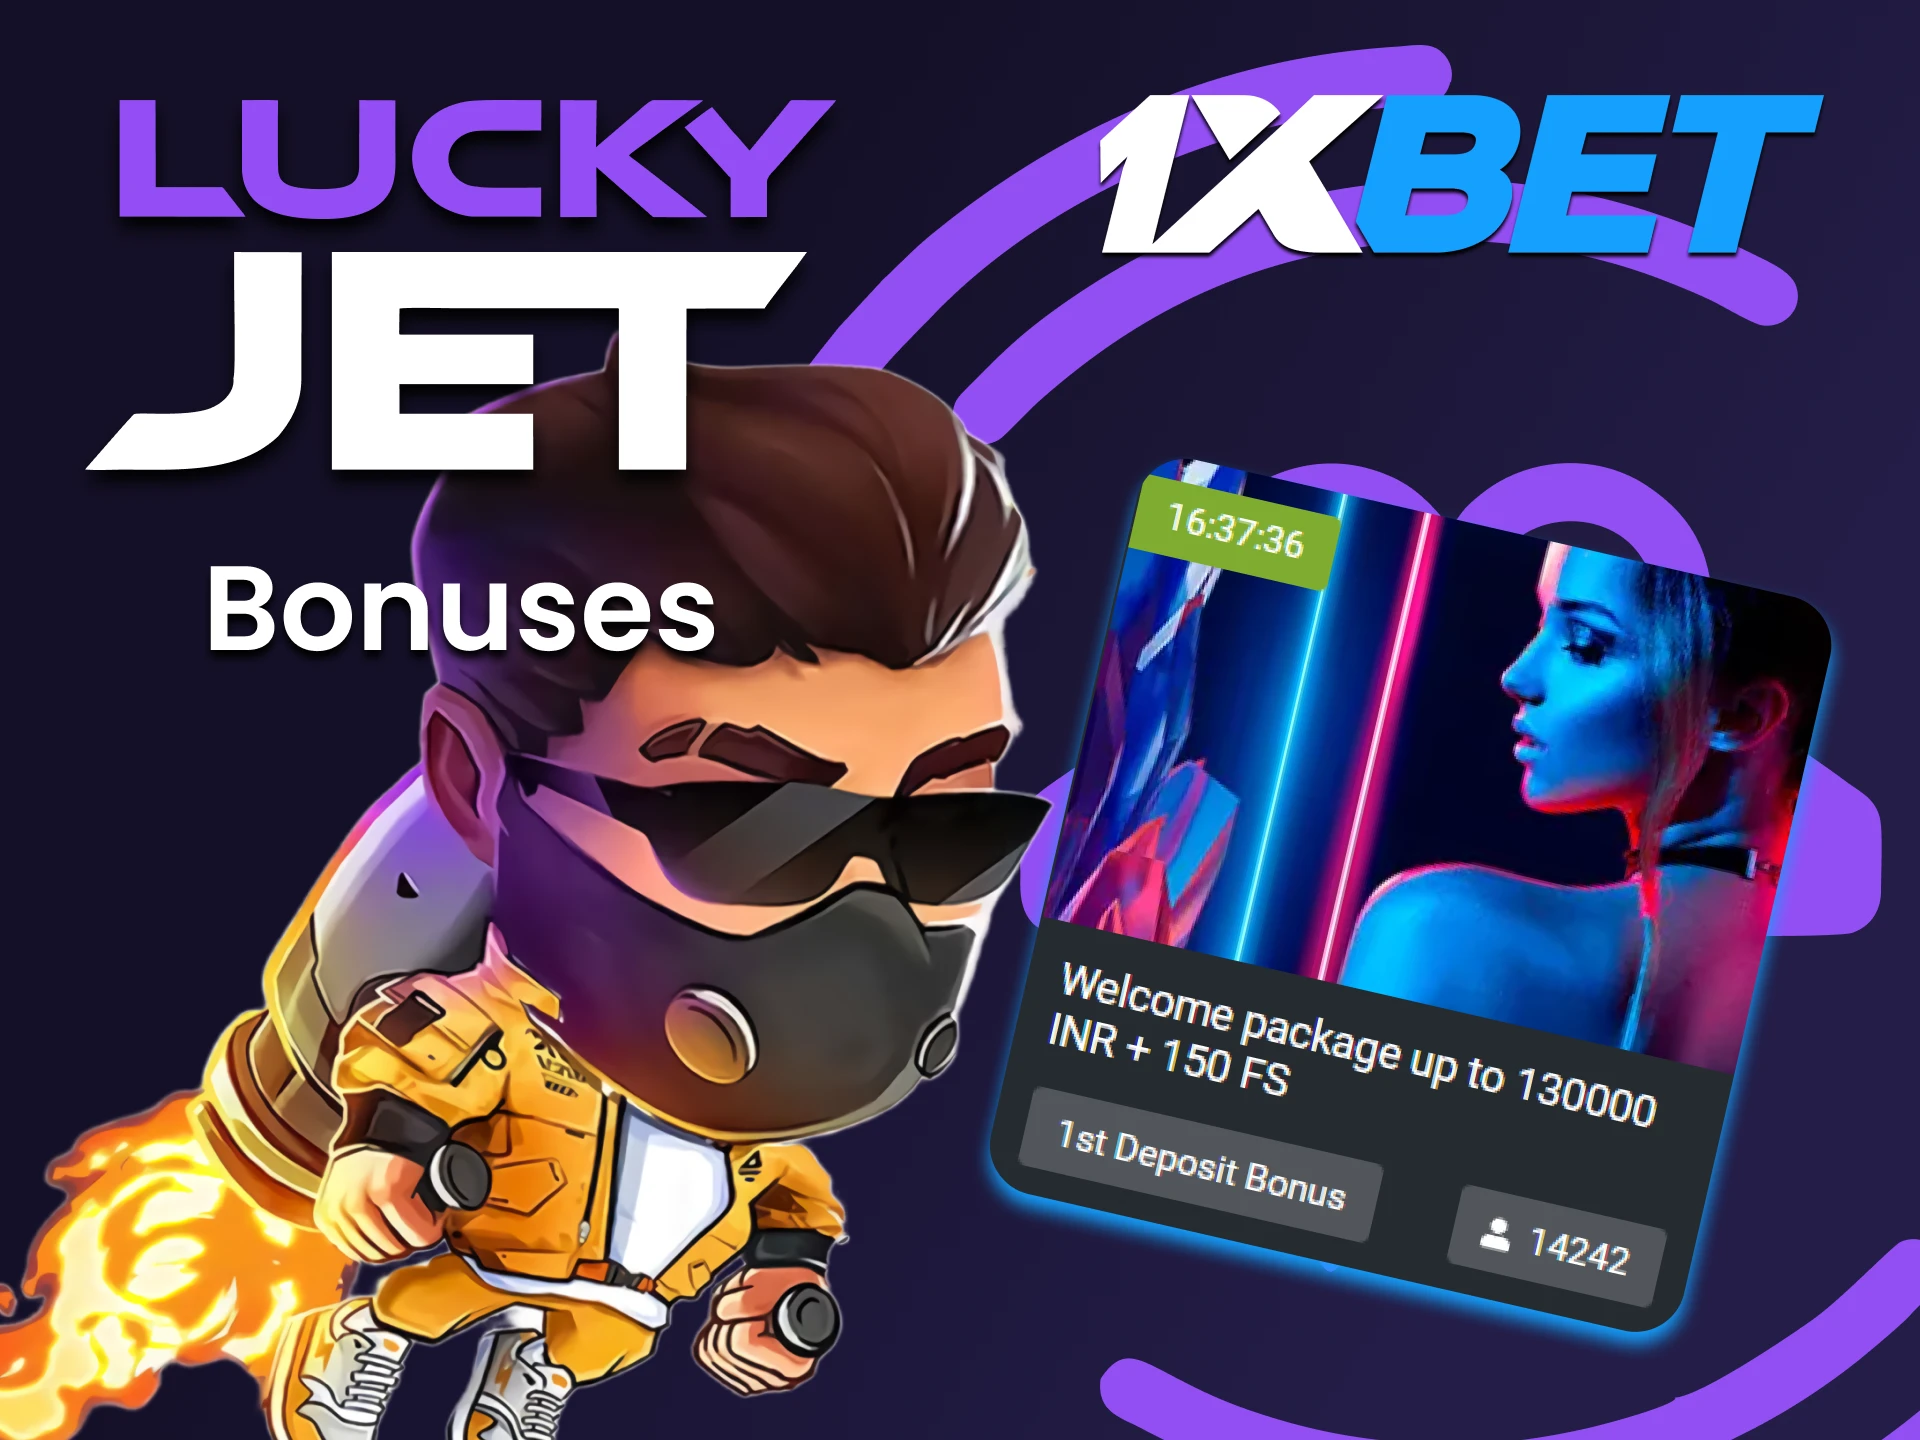 Get bonuses from 1xbet for playing Lucky Jet.